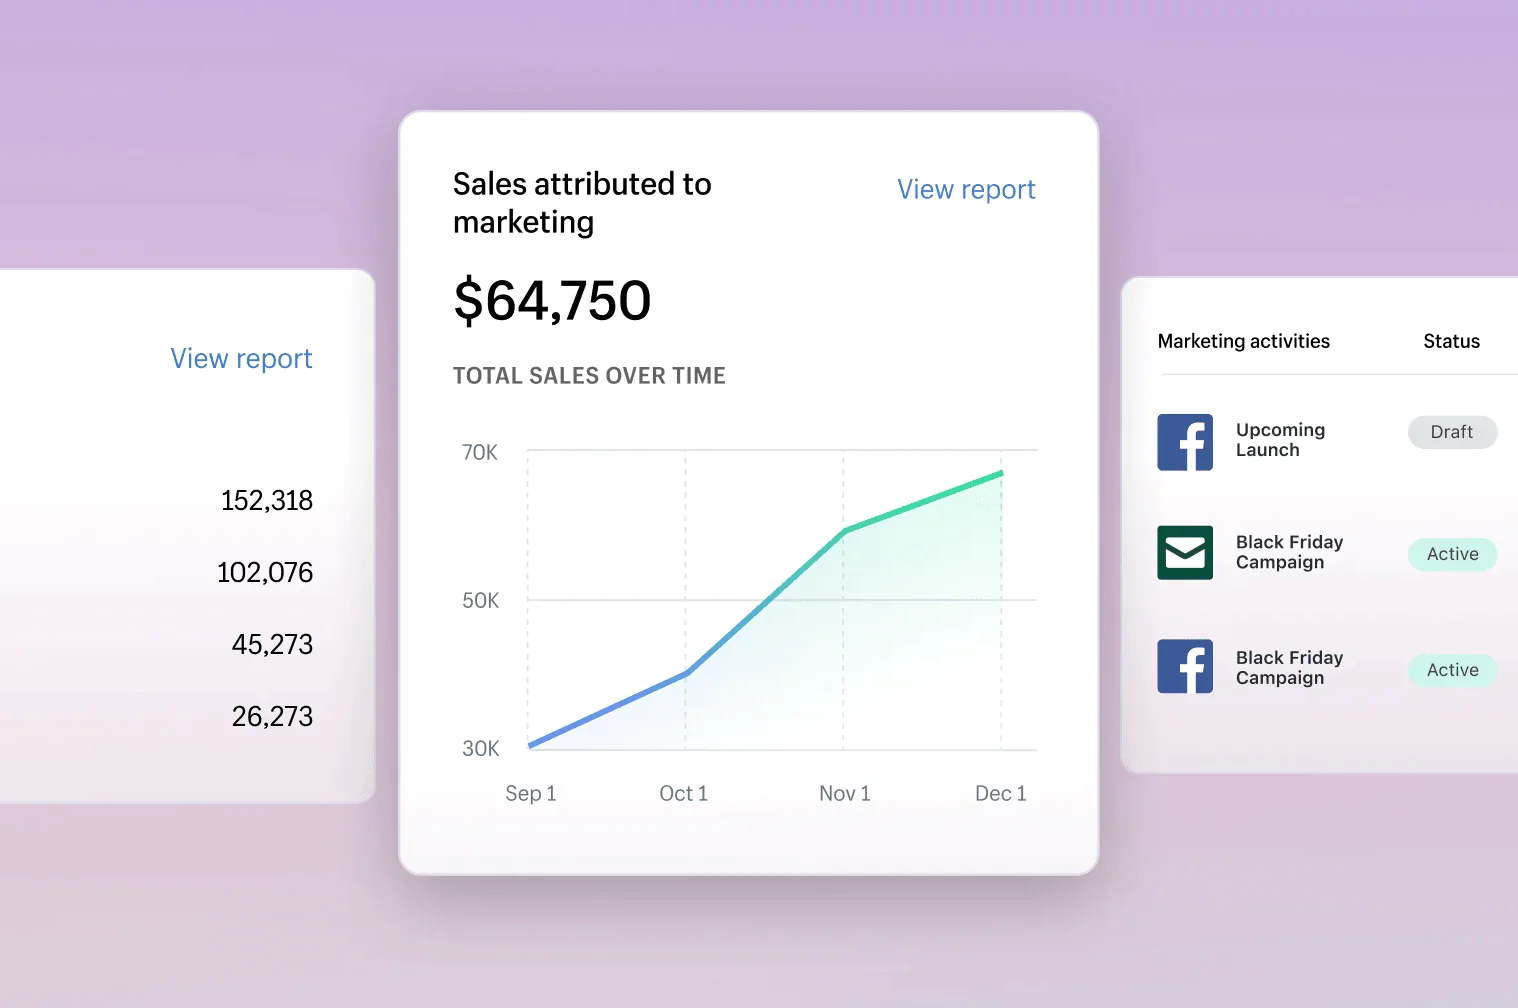 Shopify provides built-in tools to boost business success